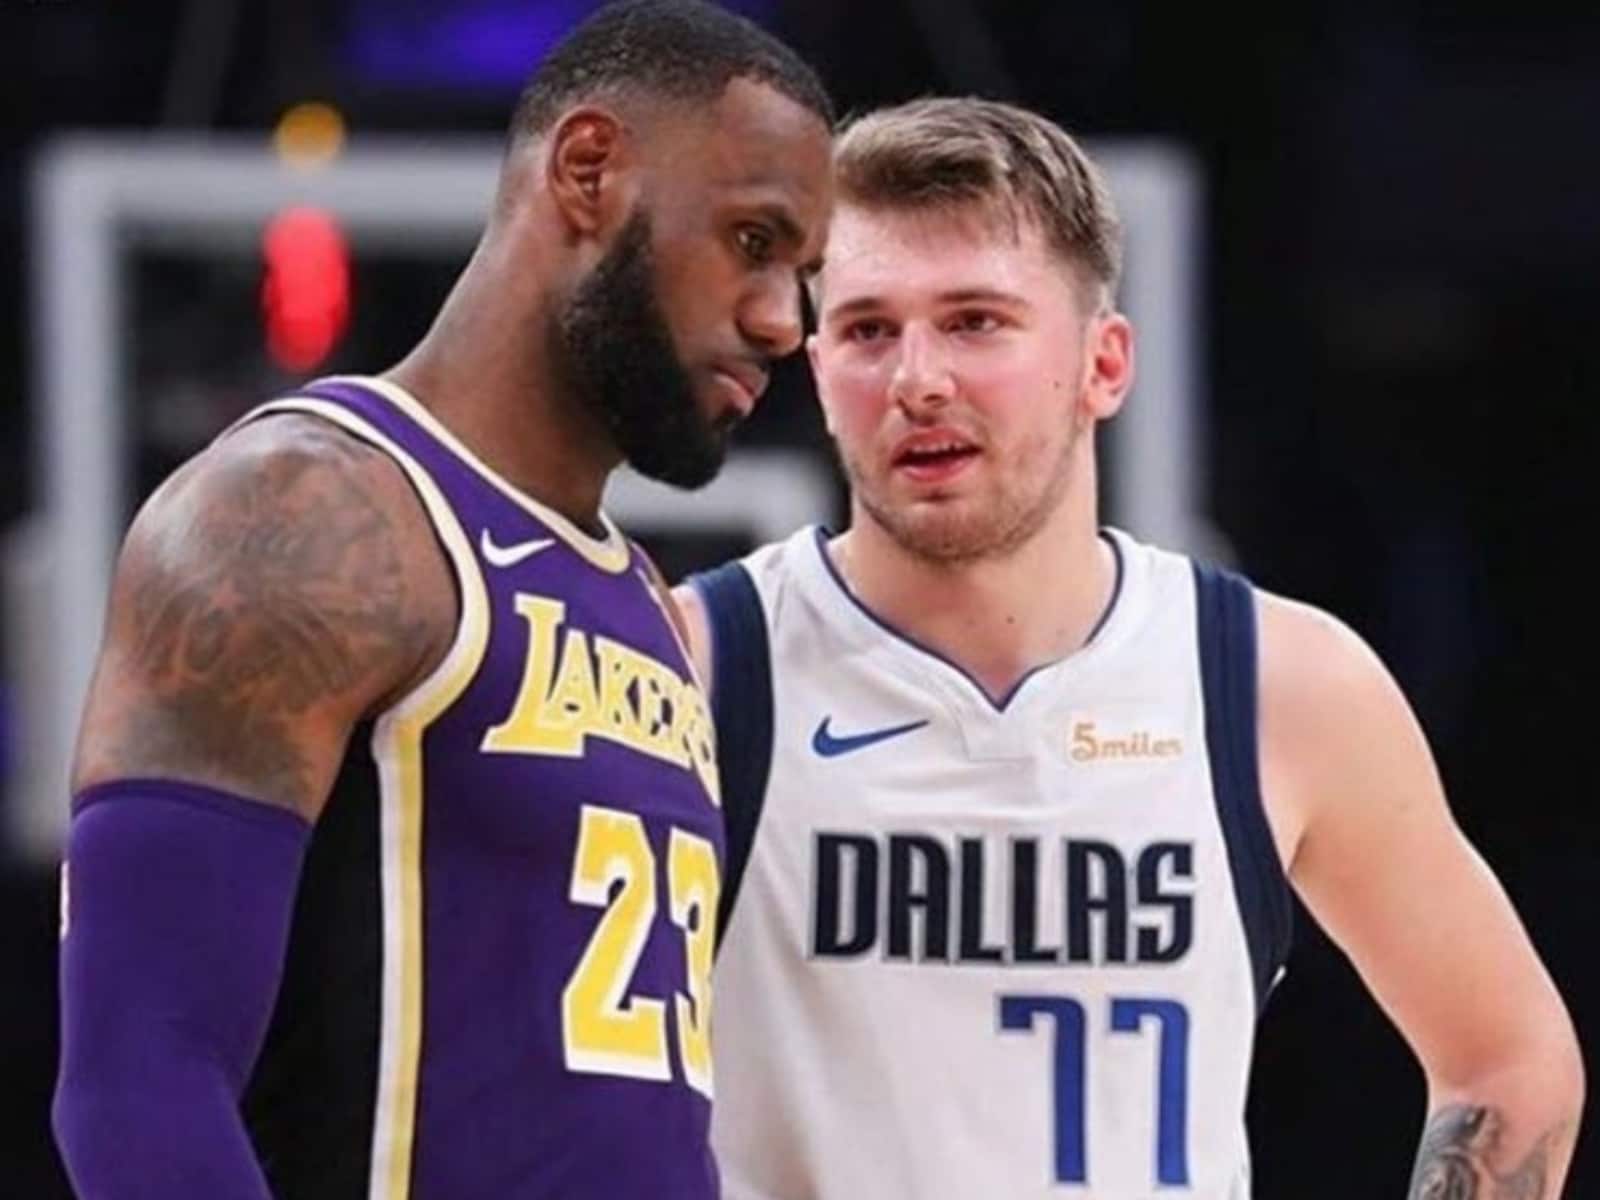 Lakers To Face Dallas in Christmas Day Game After Season-Opening